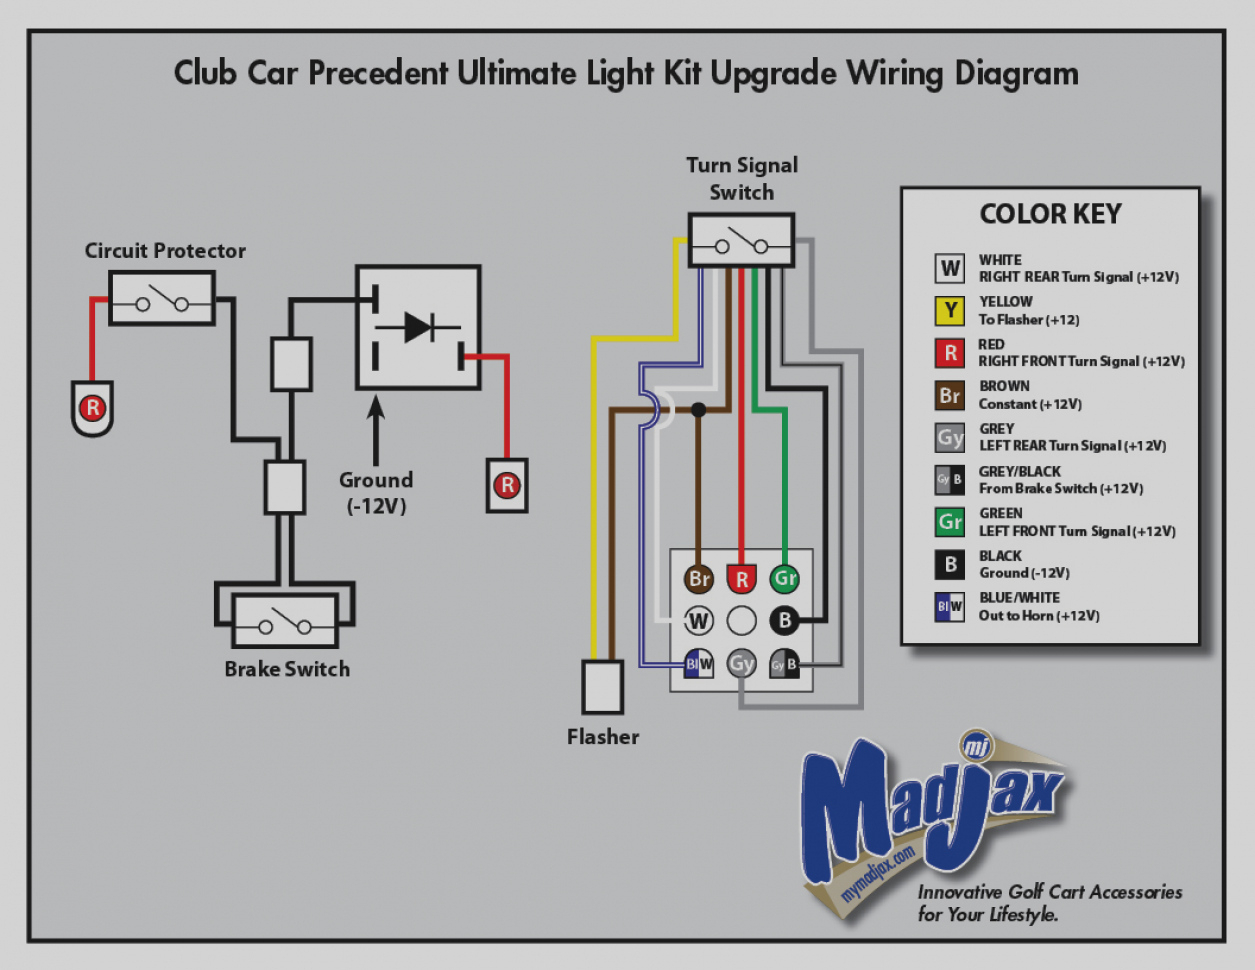 Tail Light Wiring Diagram 1995 Chevy Truck Cadician s Blog